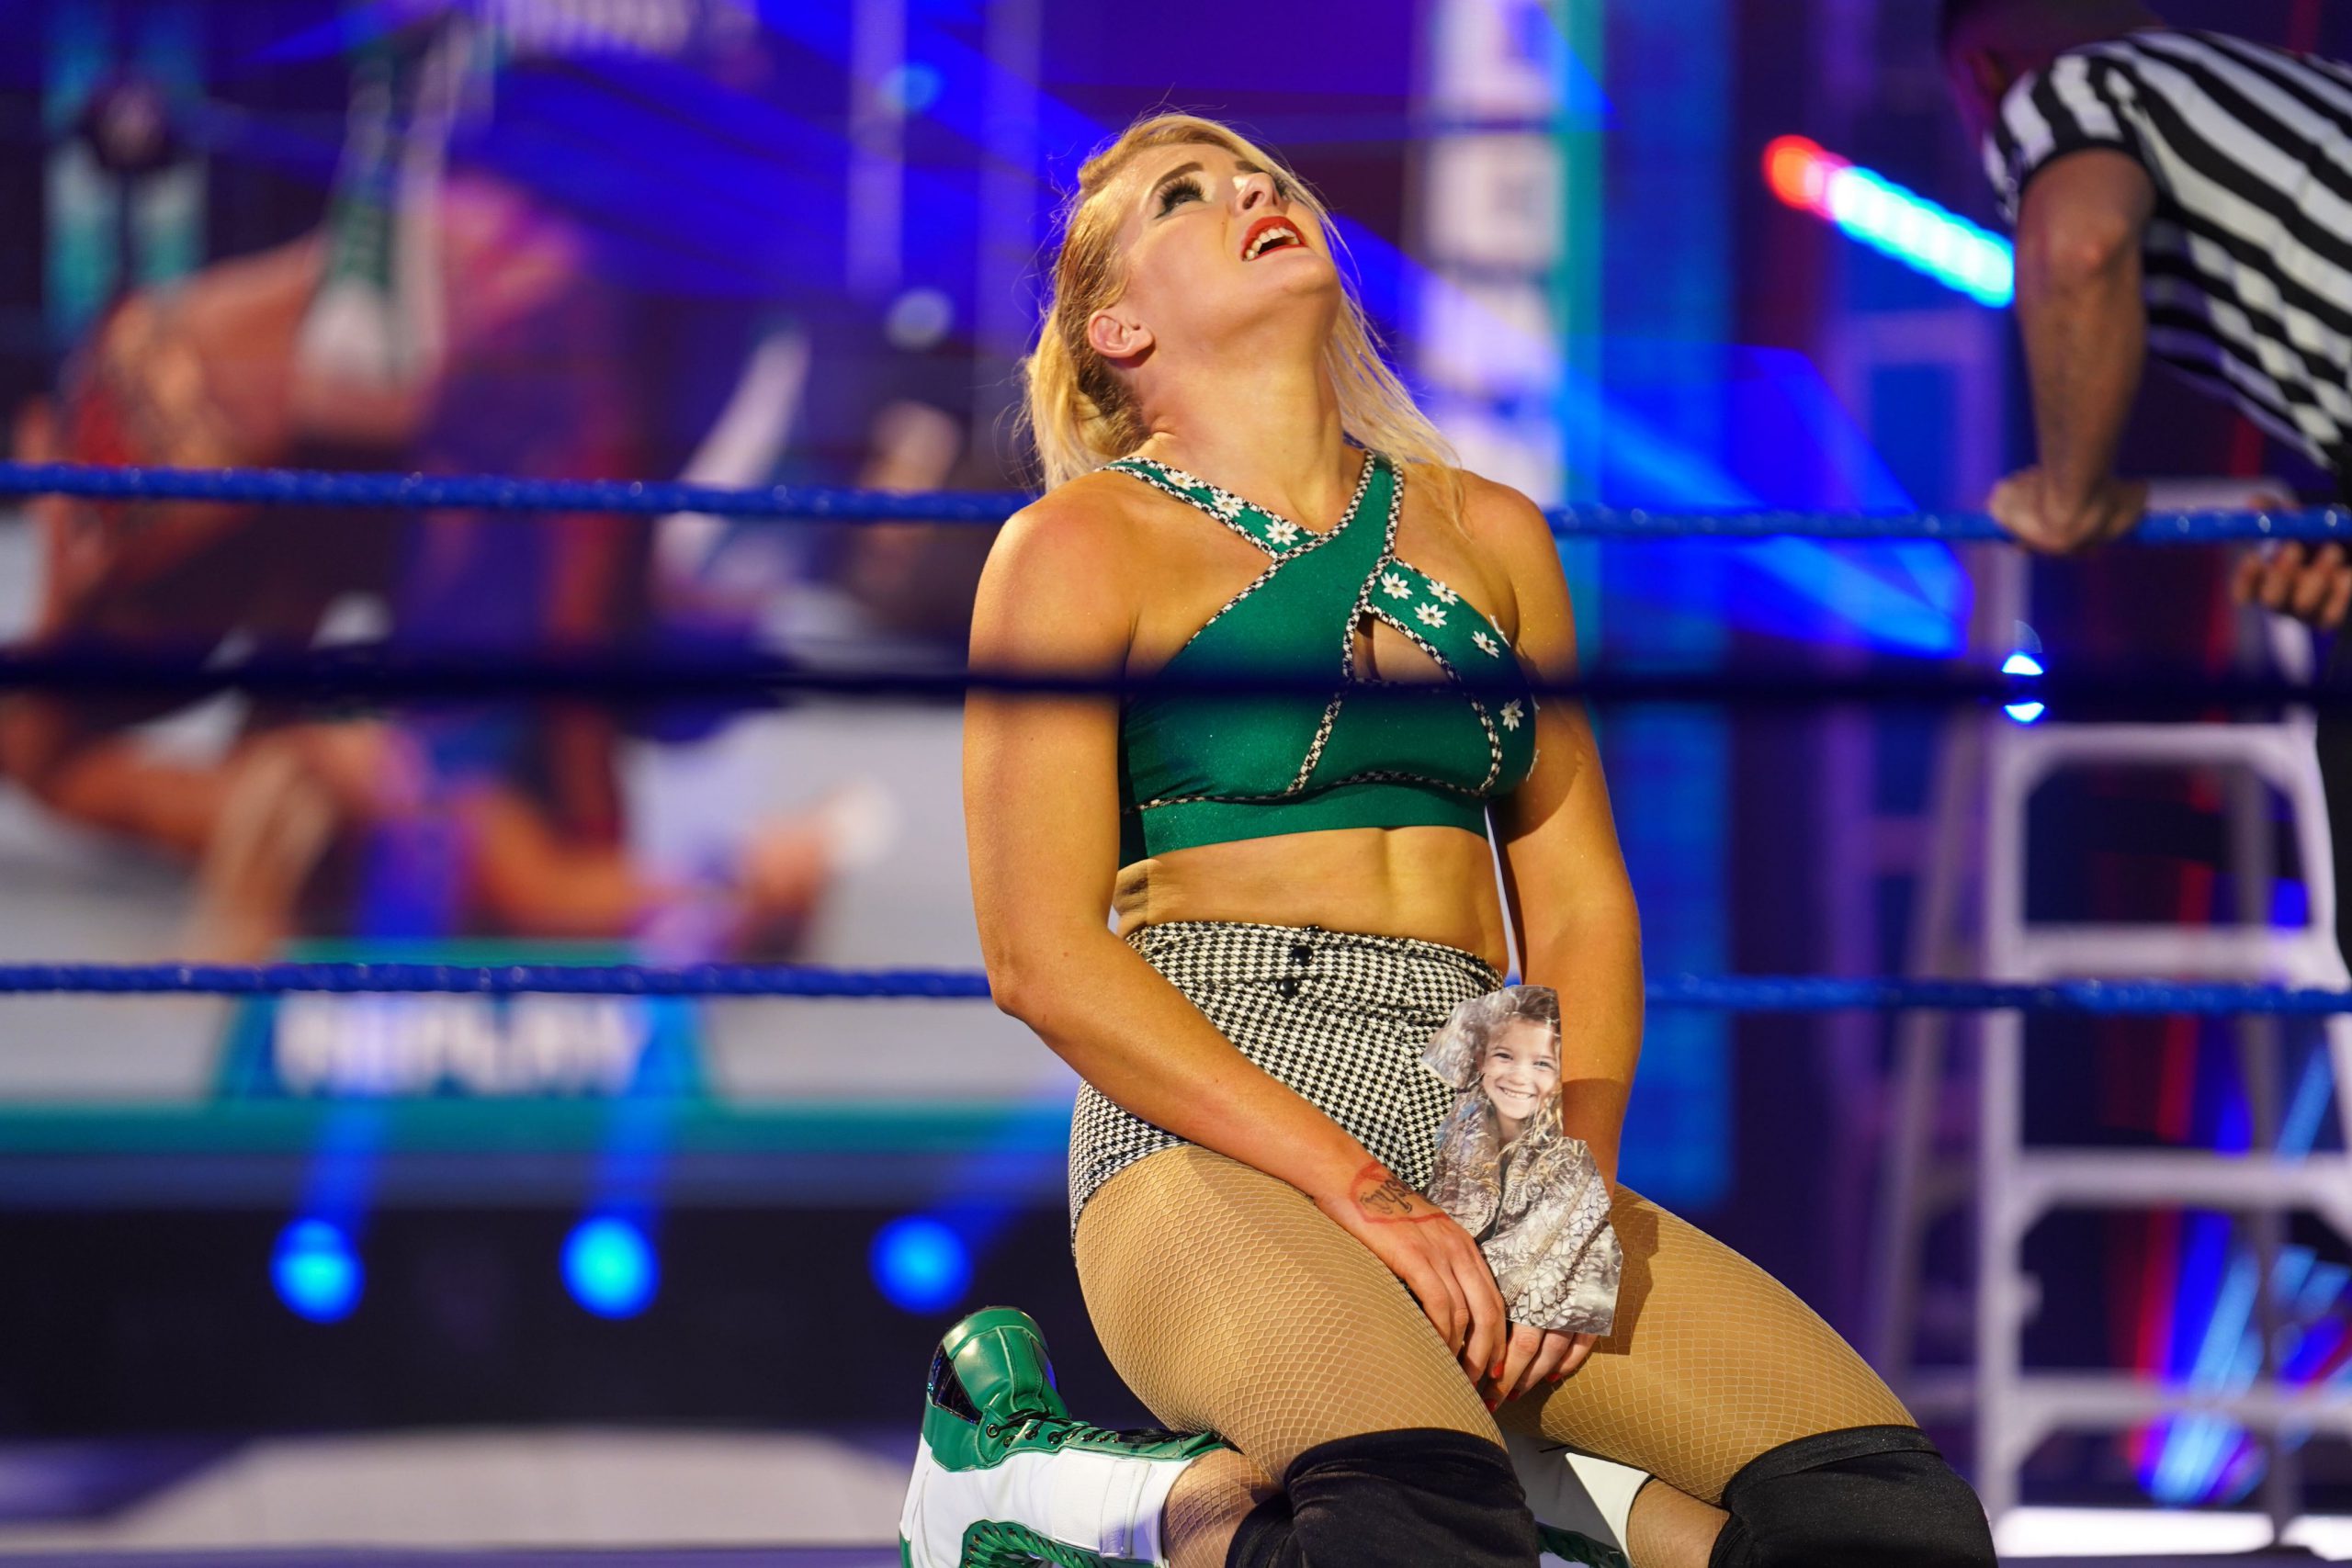 Lacey Evans secures her spot in the MITB Ladder Match - Diva Dirt.